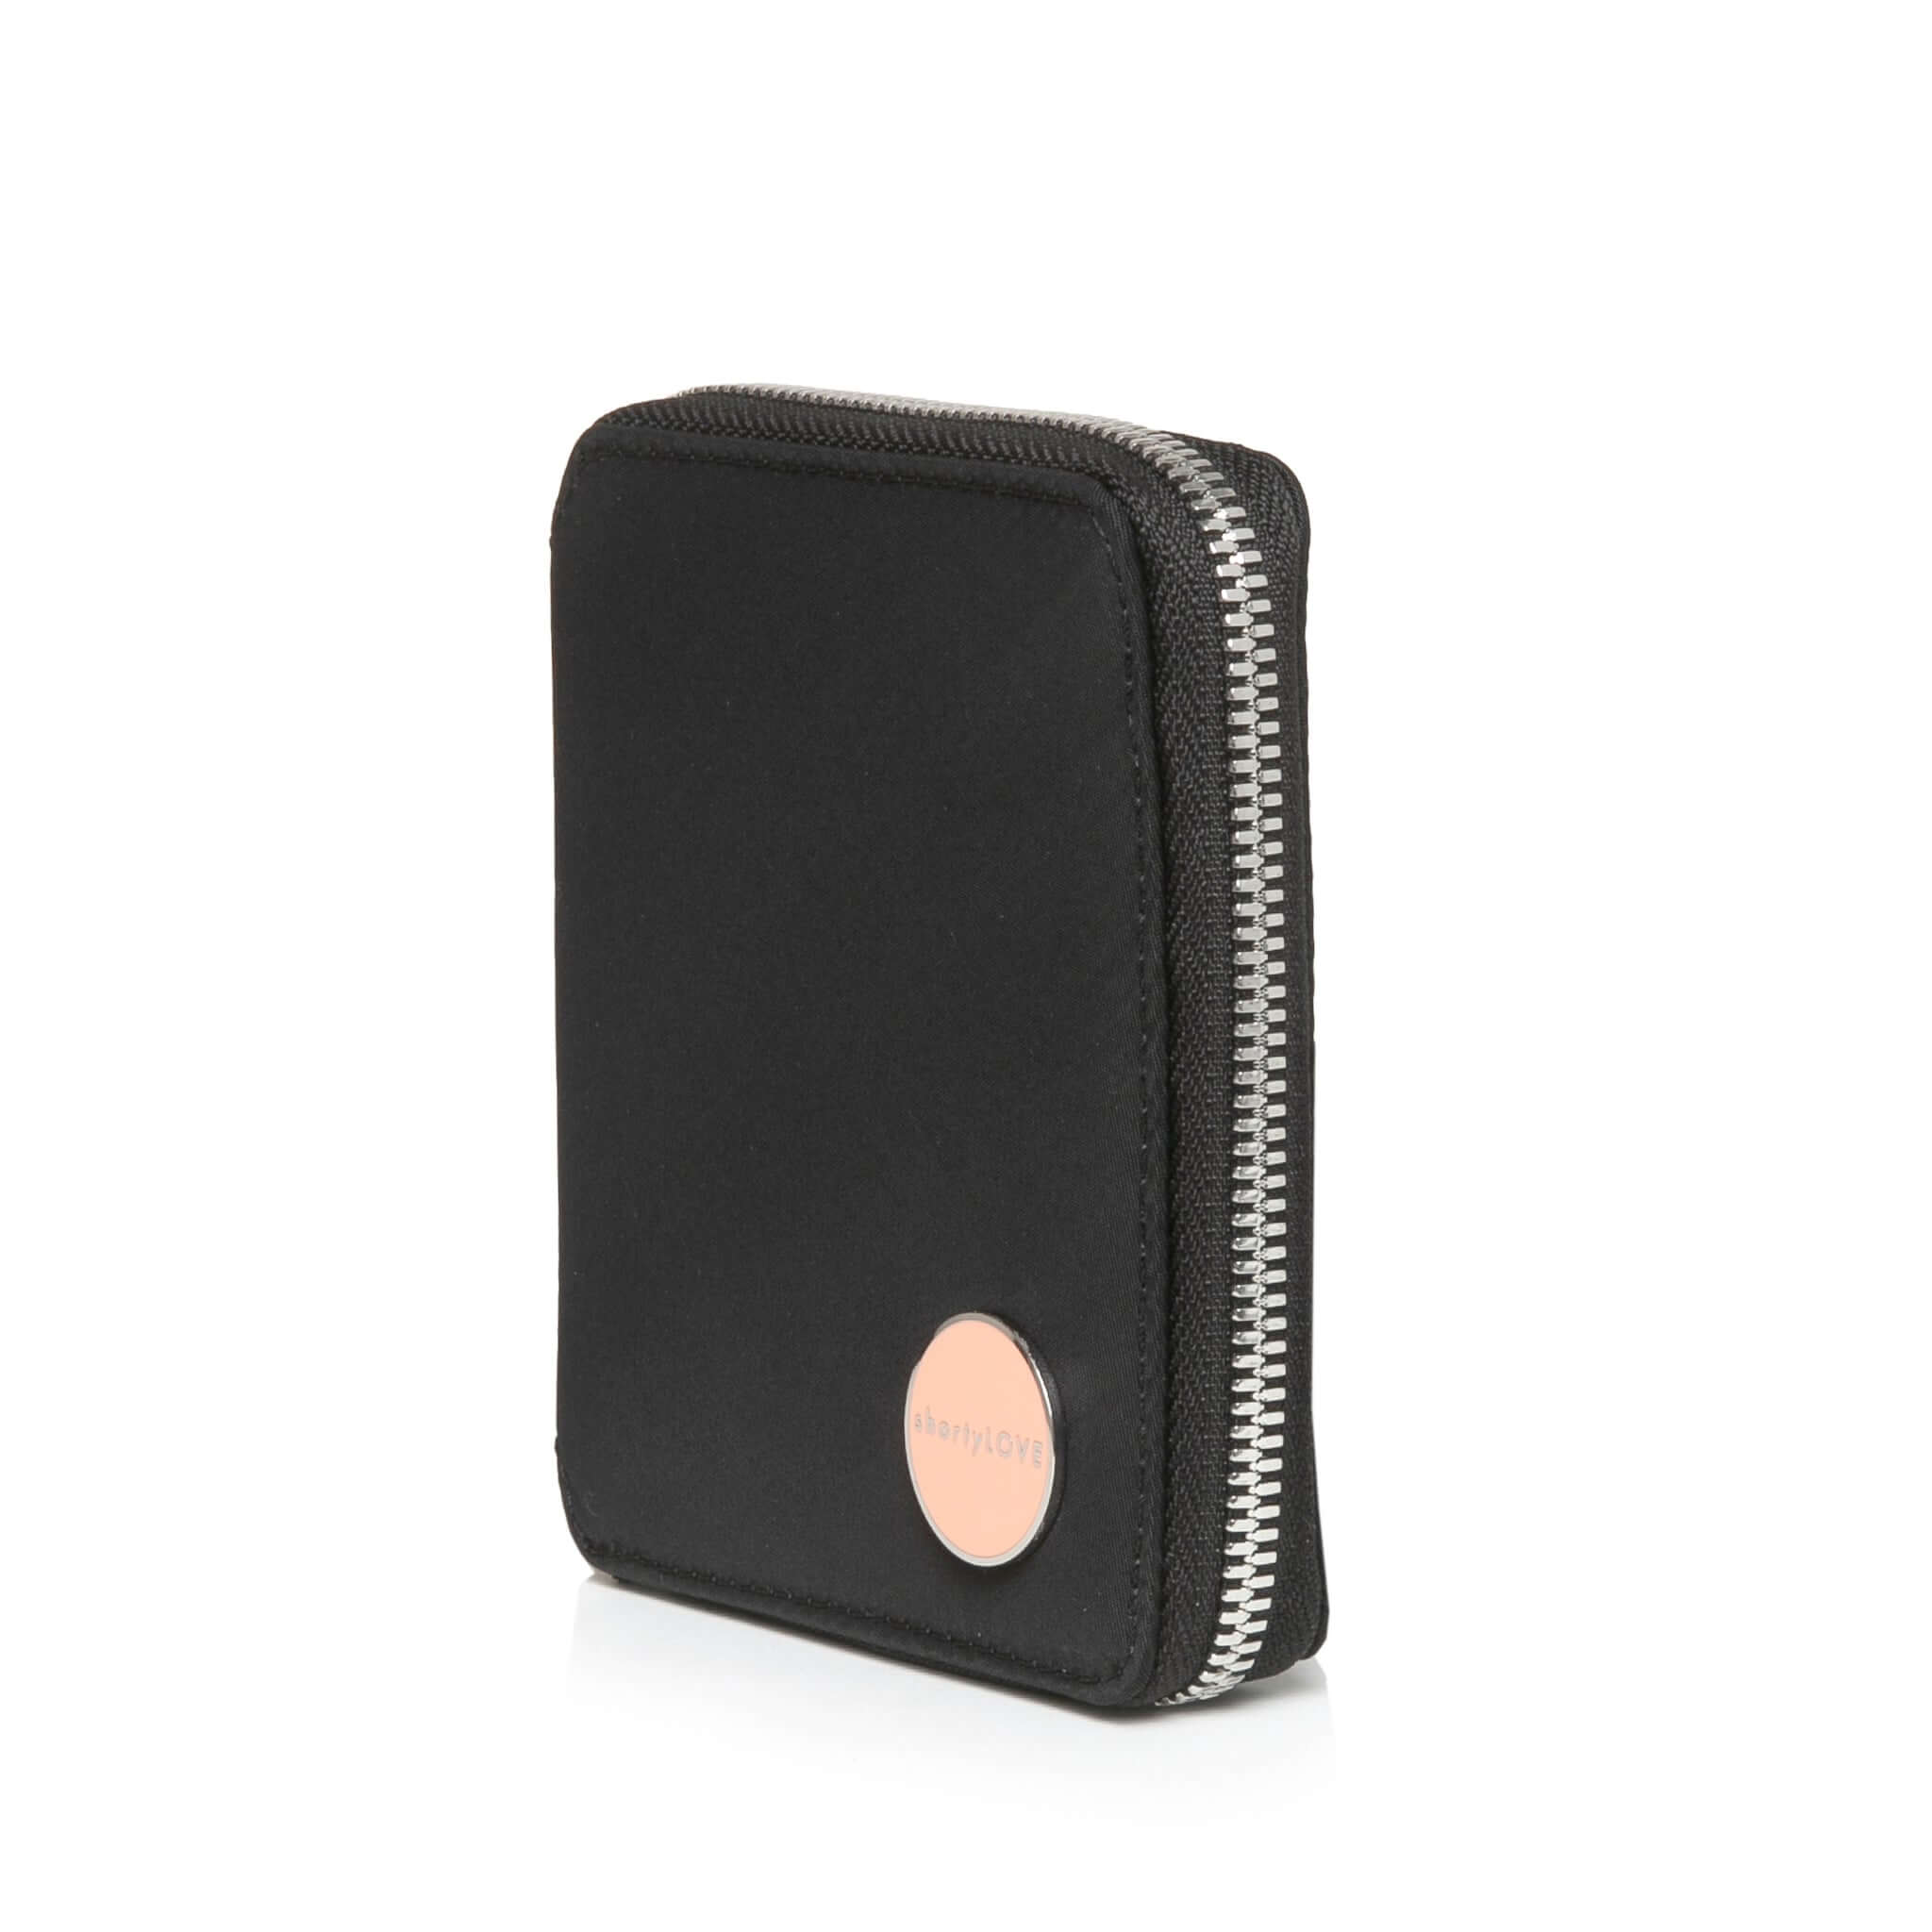 Small Leather or Fabric Wallet, RFID Protection